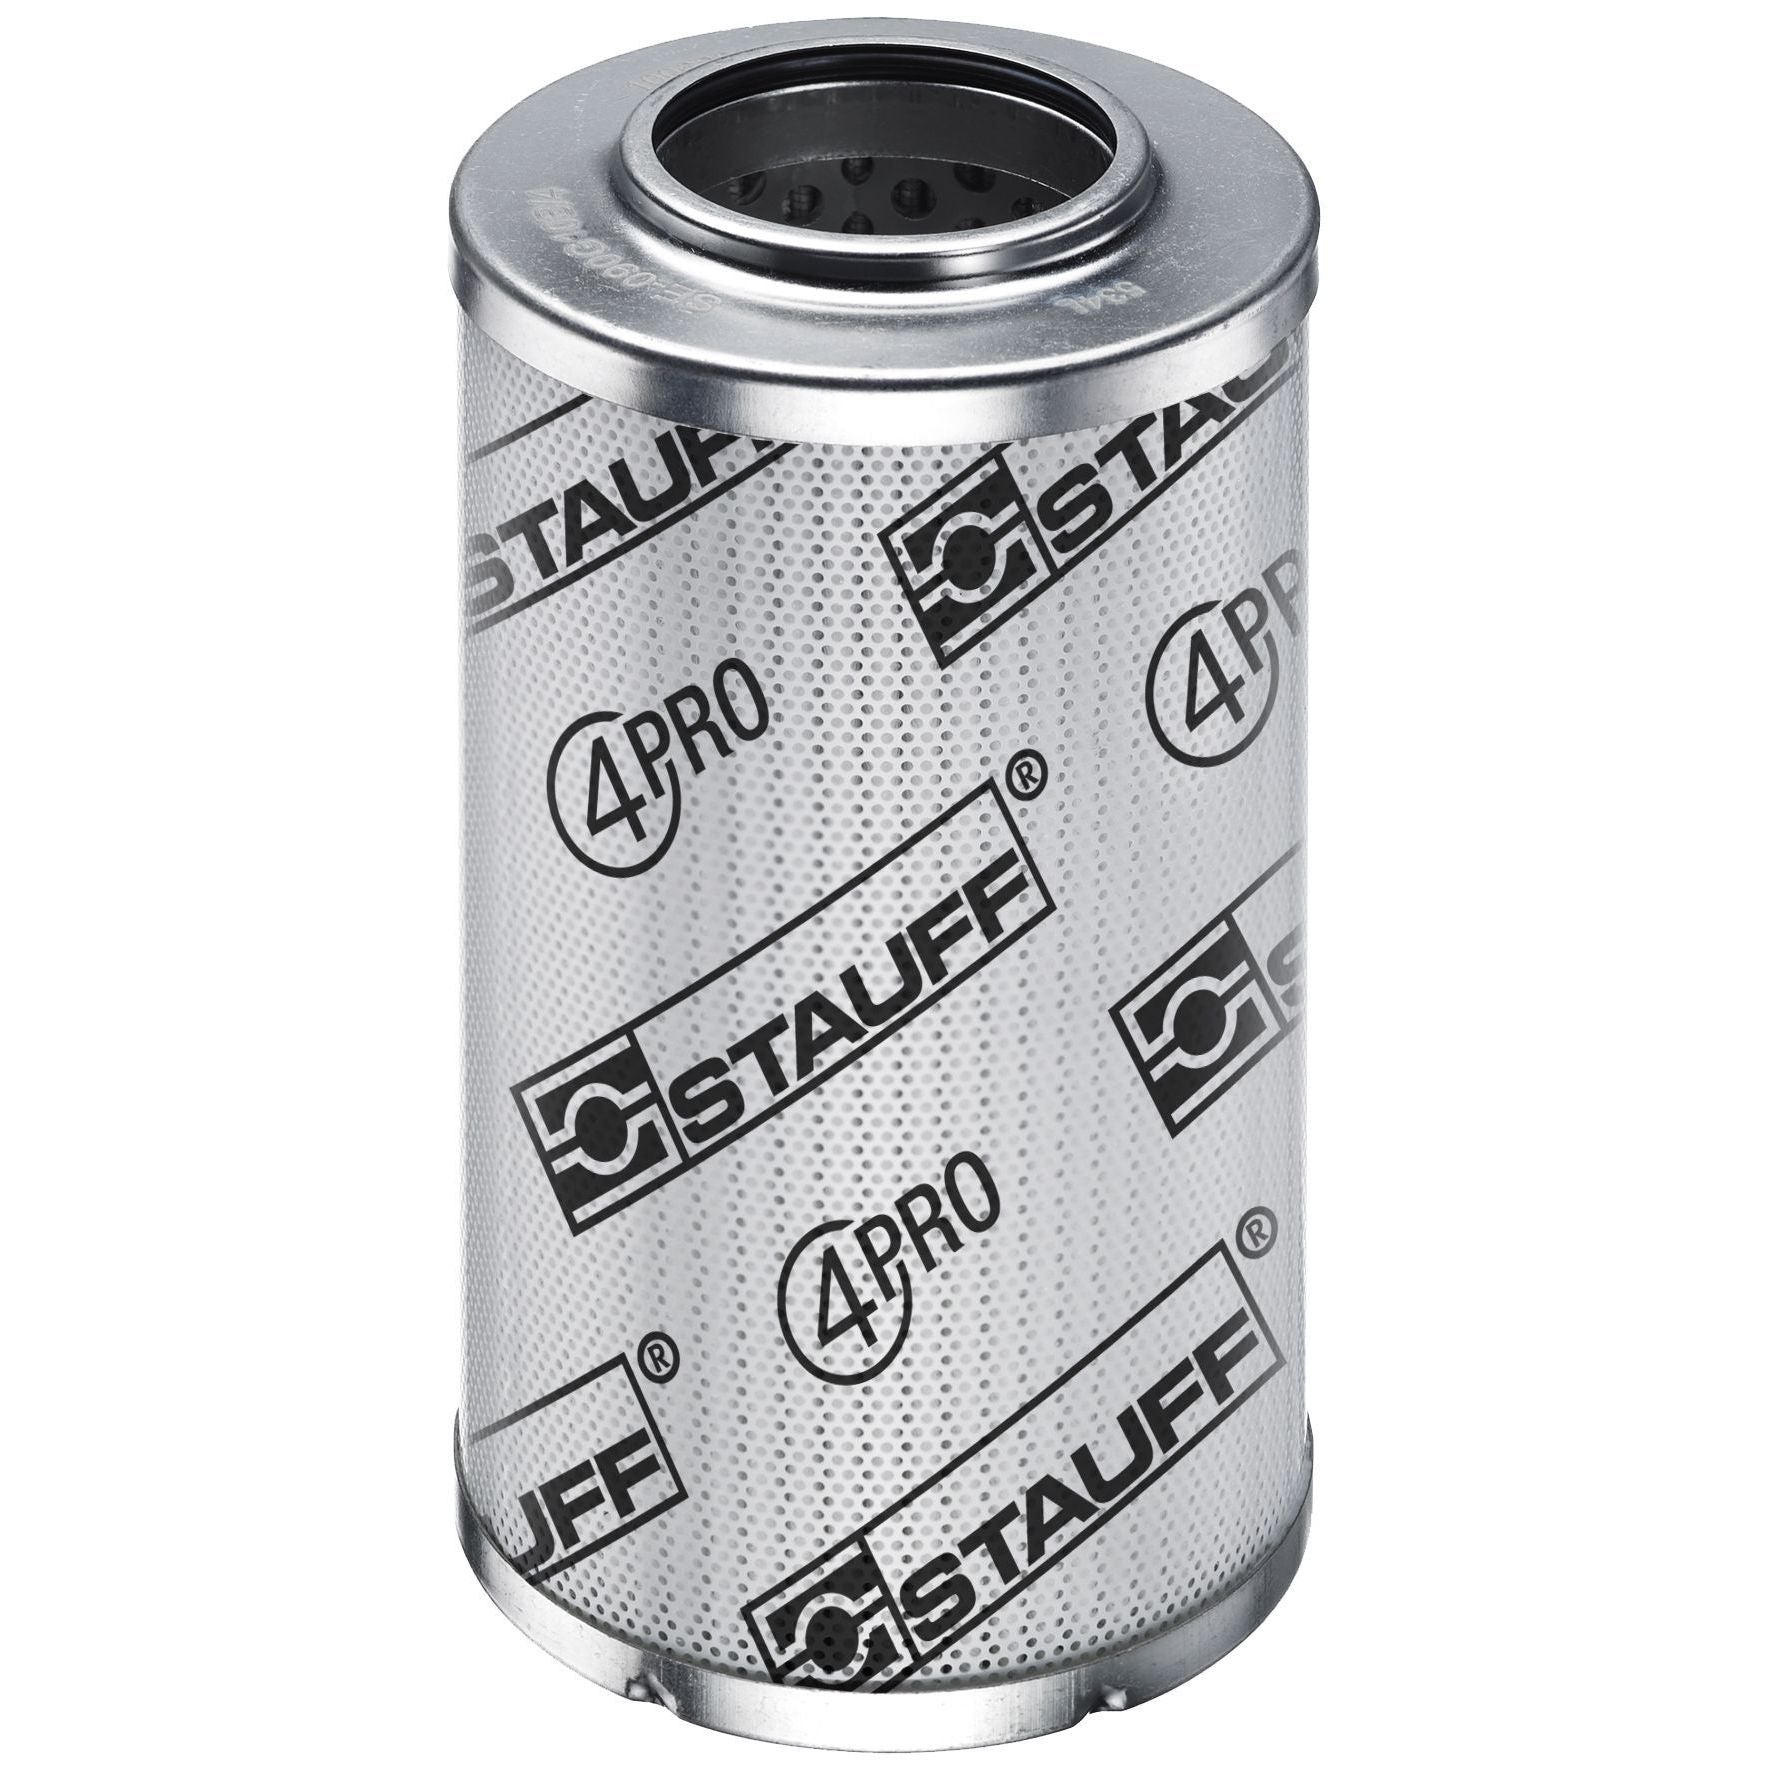 SE-090-H-03-E/4-N1 : Stauff SF-090 Series Filter Element, 3 Micron, Synthetic, 3045psi Collapse Differential, EPDM Seals